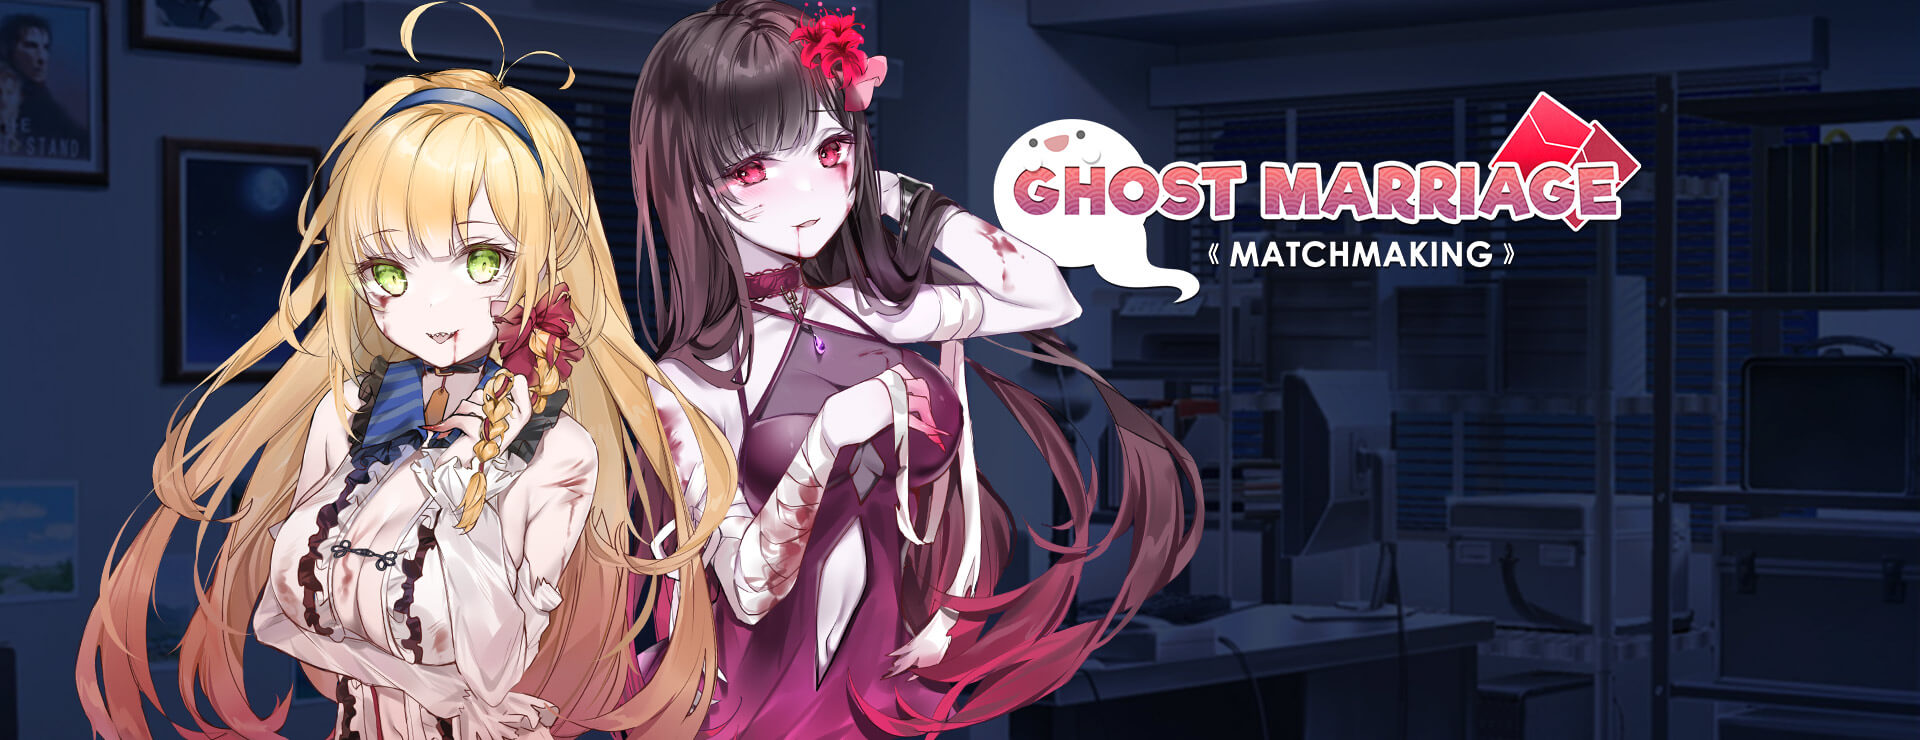 Ghost Marriage Matchmaking - RPG ゲーム